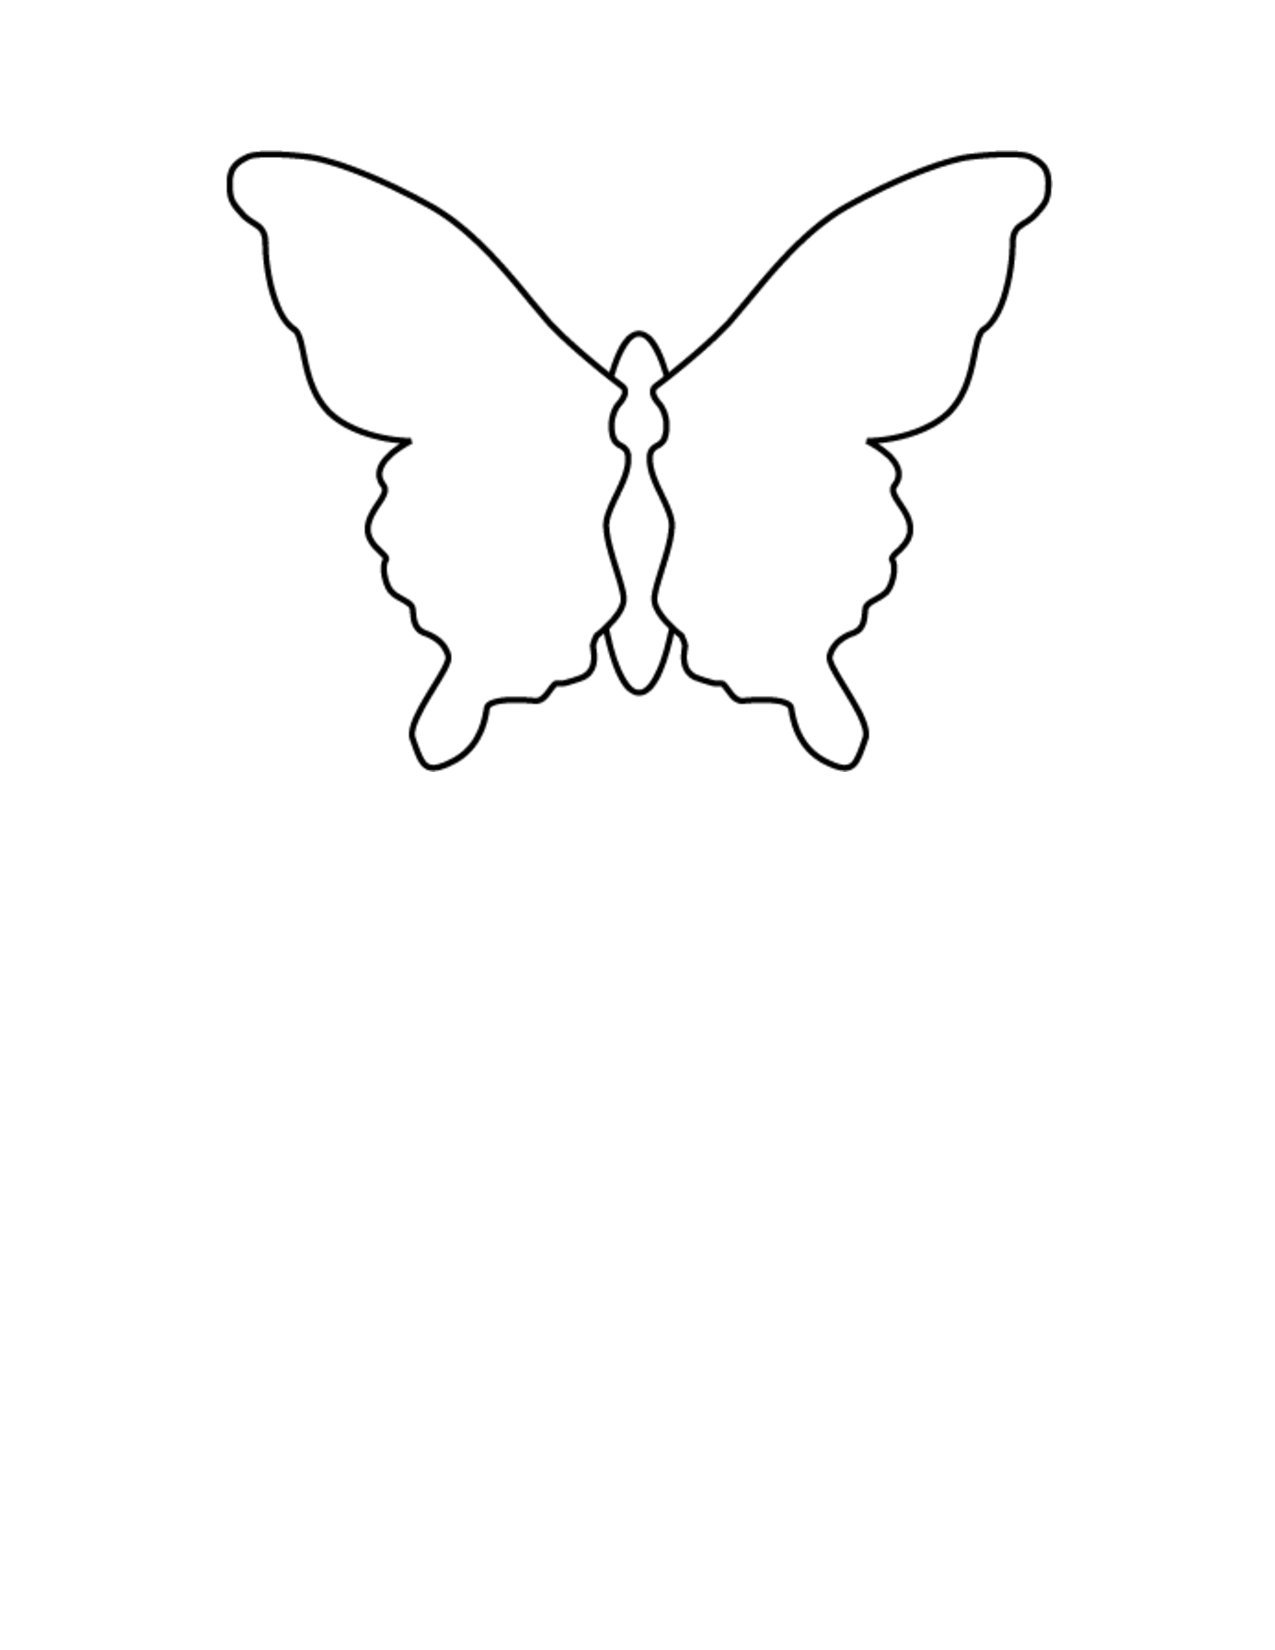 Clip Arts Related To : printable butterfly puppet template. view all Butter...